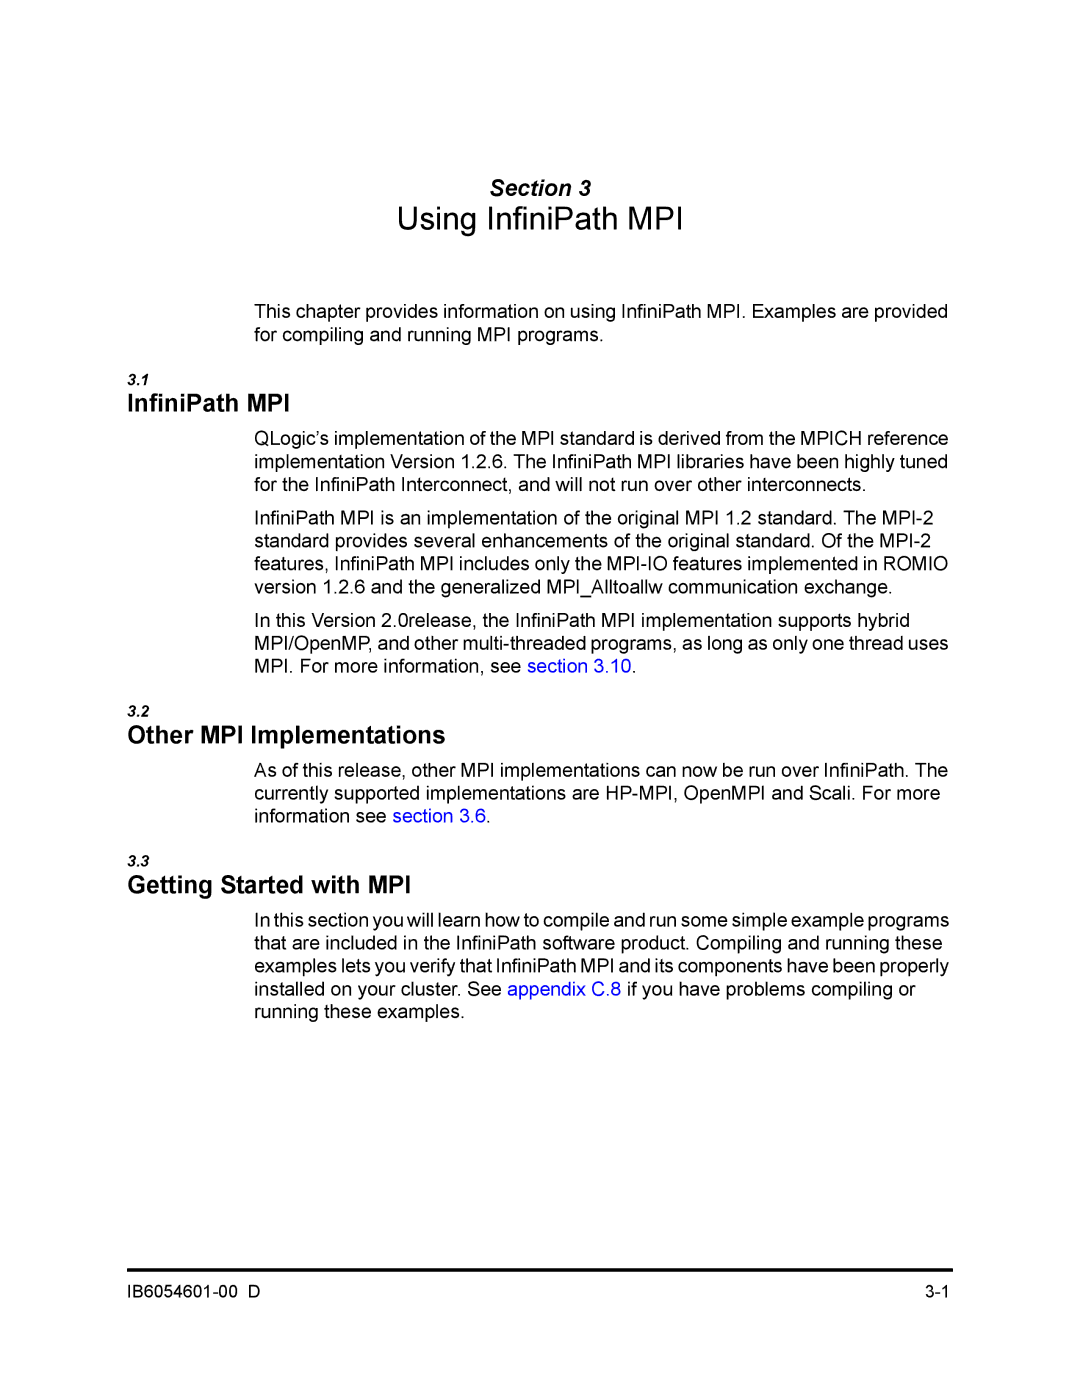 Q-Logic IB6054601-00 D manual InfiniPath MPI, Other MPI Implementations, Getting Started with MPI 